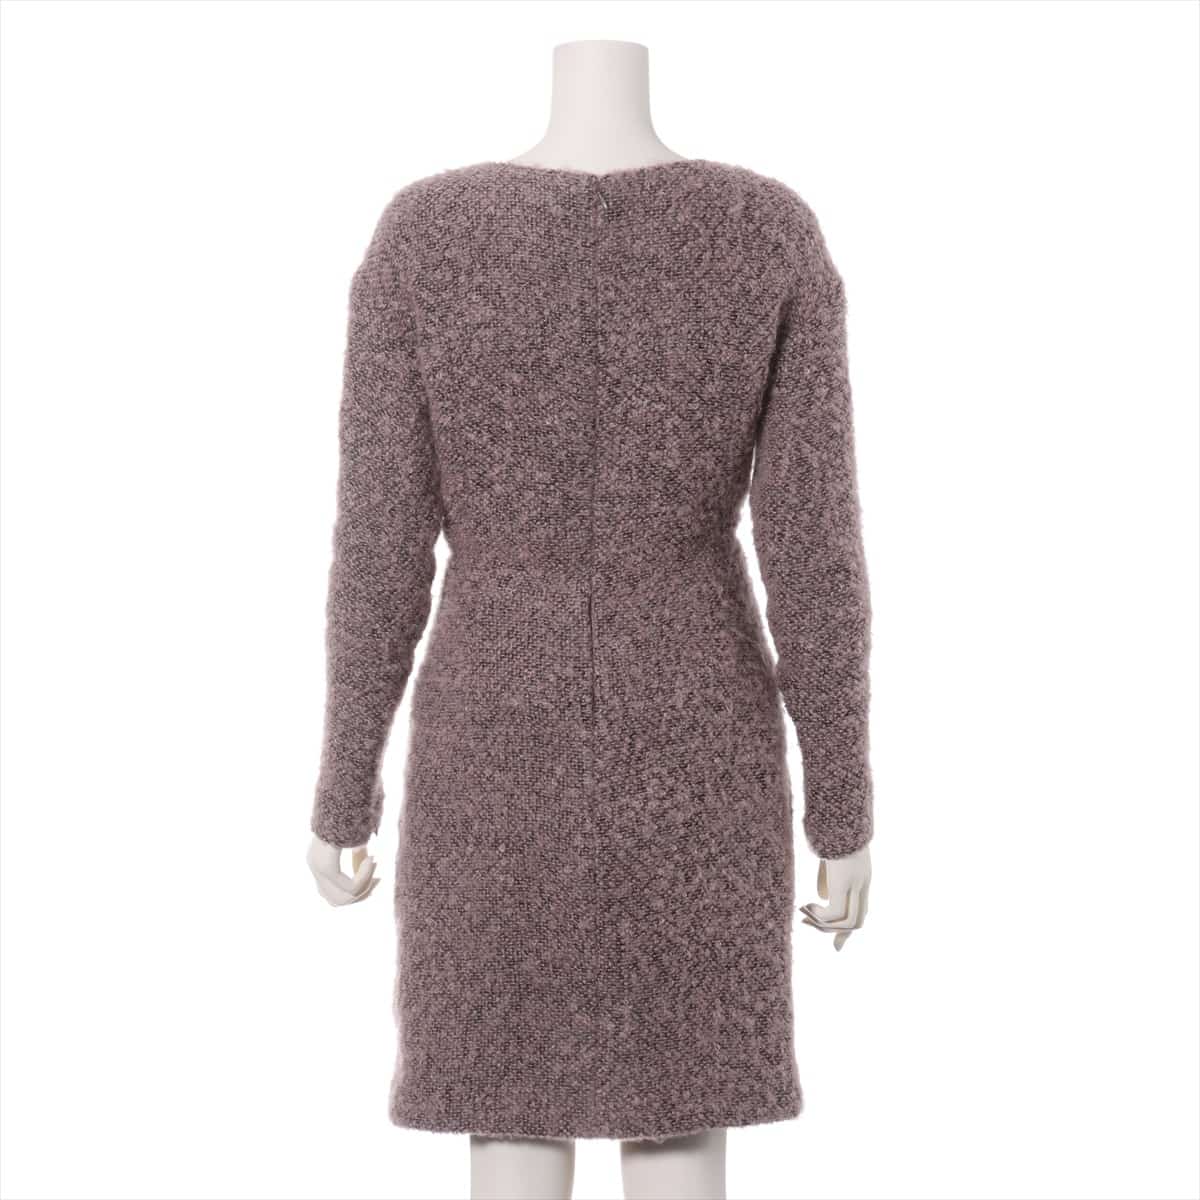 Chanel P49 Tweed Dress 36 Ladies' Pink  There are spots on the armpits